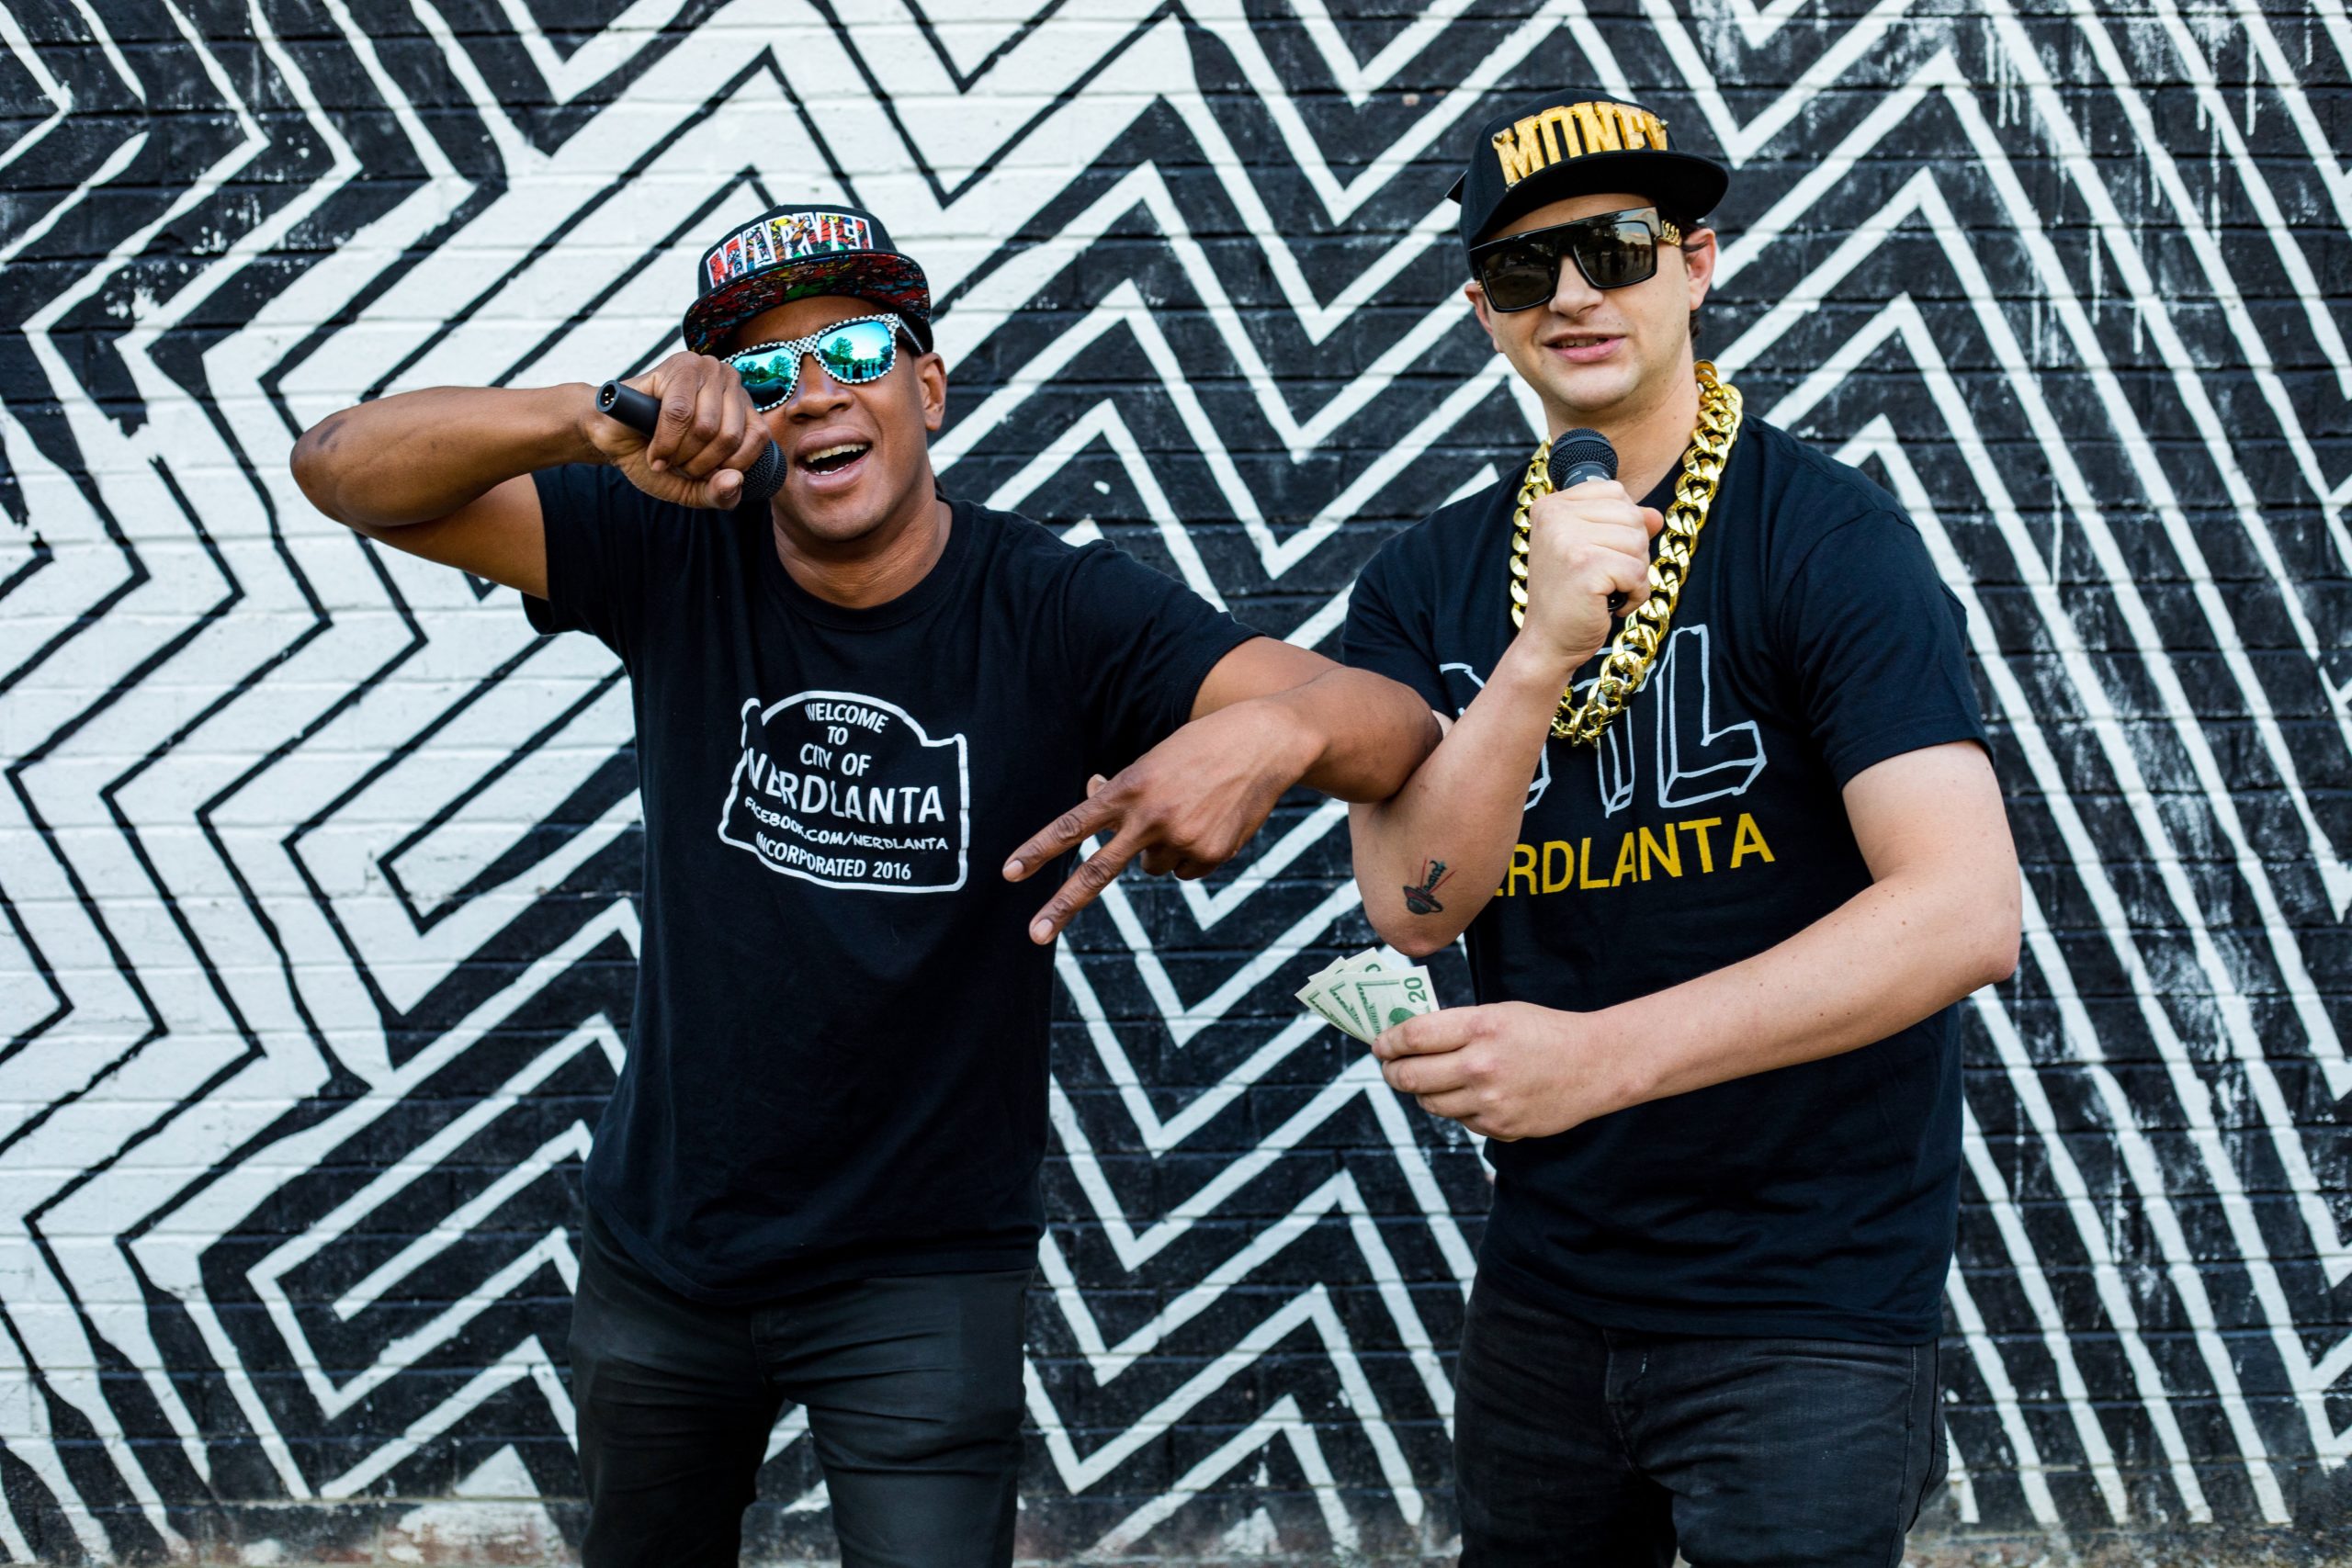 Two rappers perform in front of a brick wall with a black and white zig zag pattern on it. The rapper on the right is holding some banknotes in one hand.